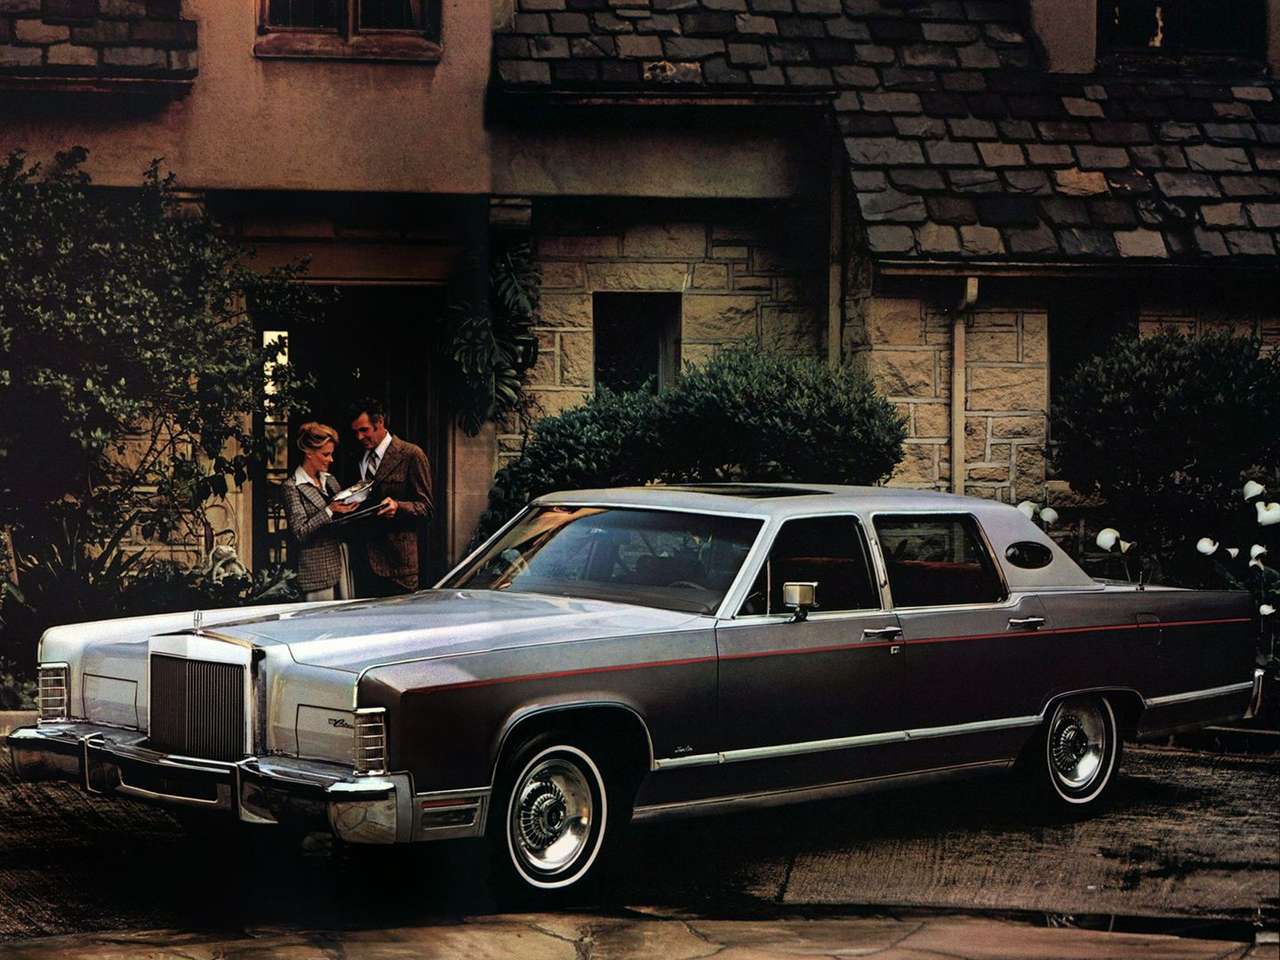 1978 Lincoln Continental Town Car. Pussel online